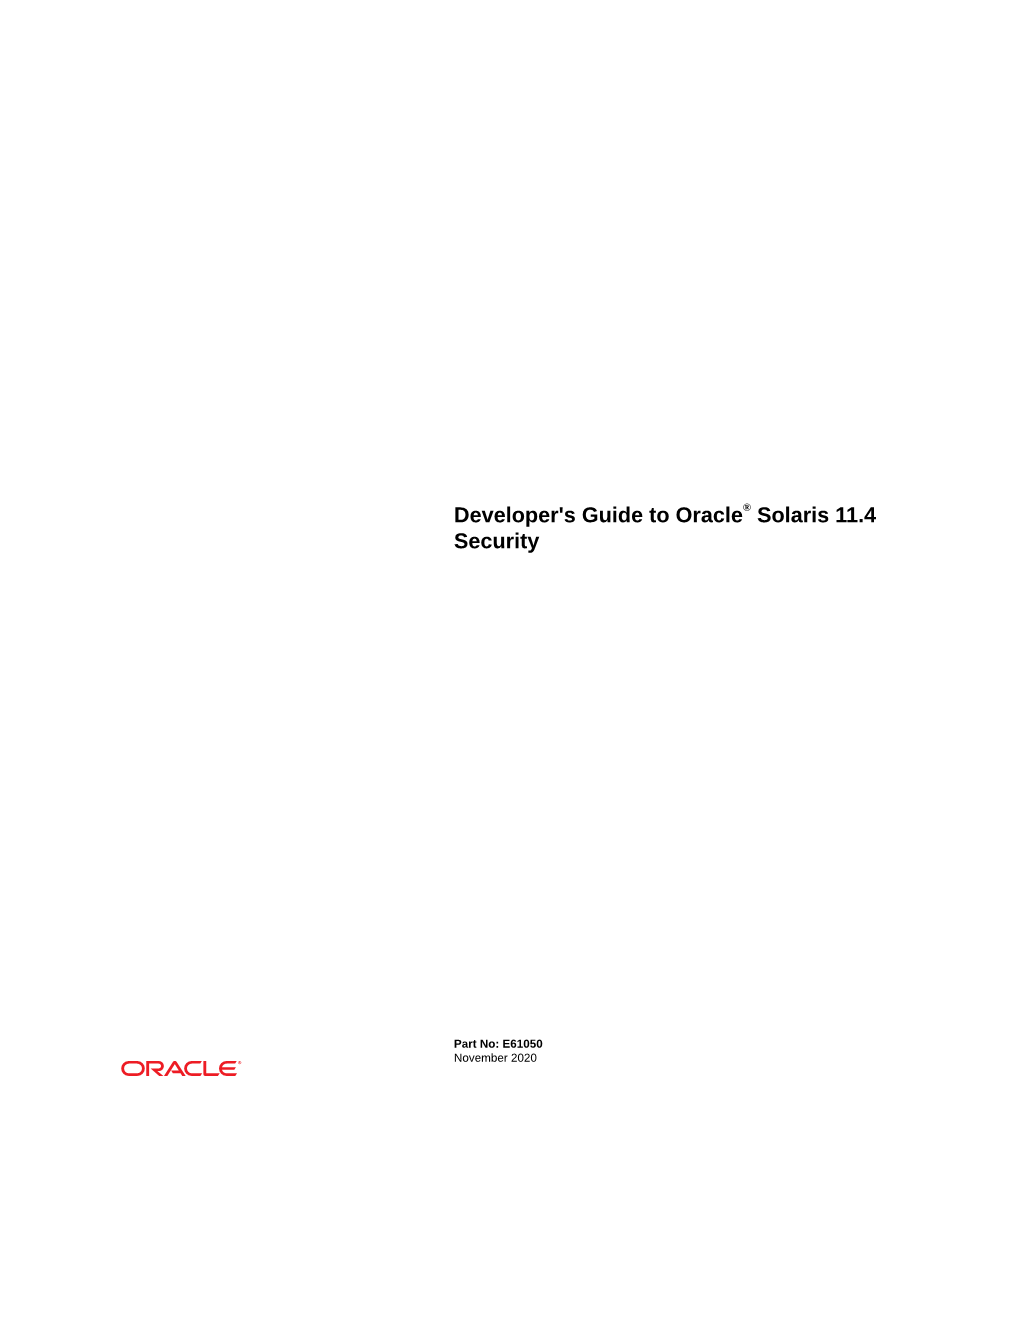 Developer's Guide to Oracle® Solaris 11.4 Security